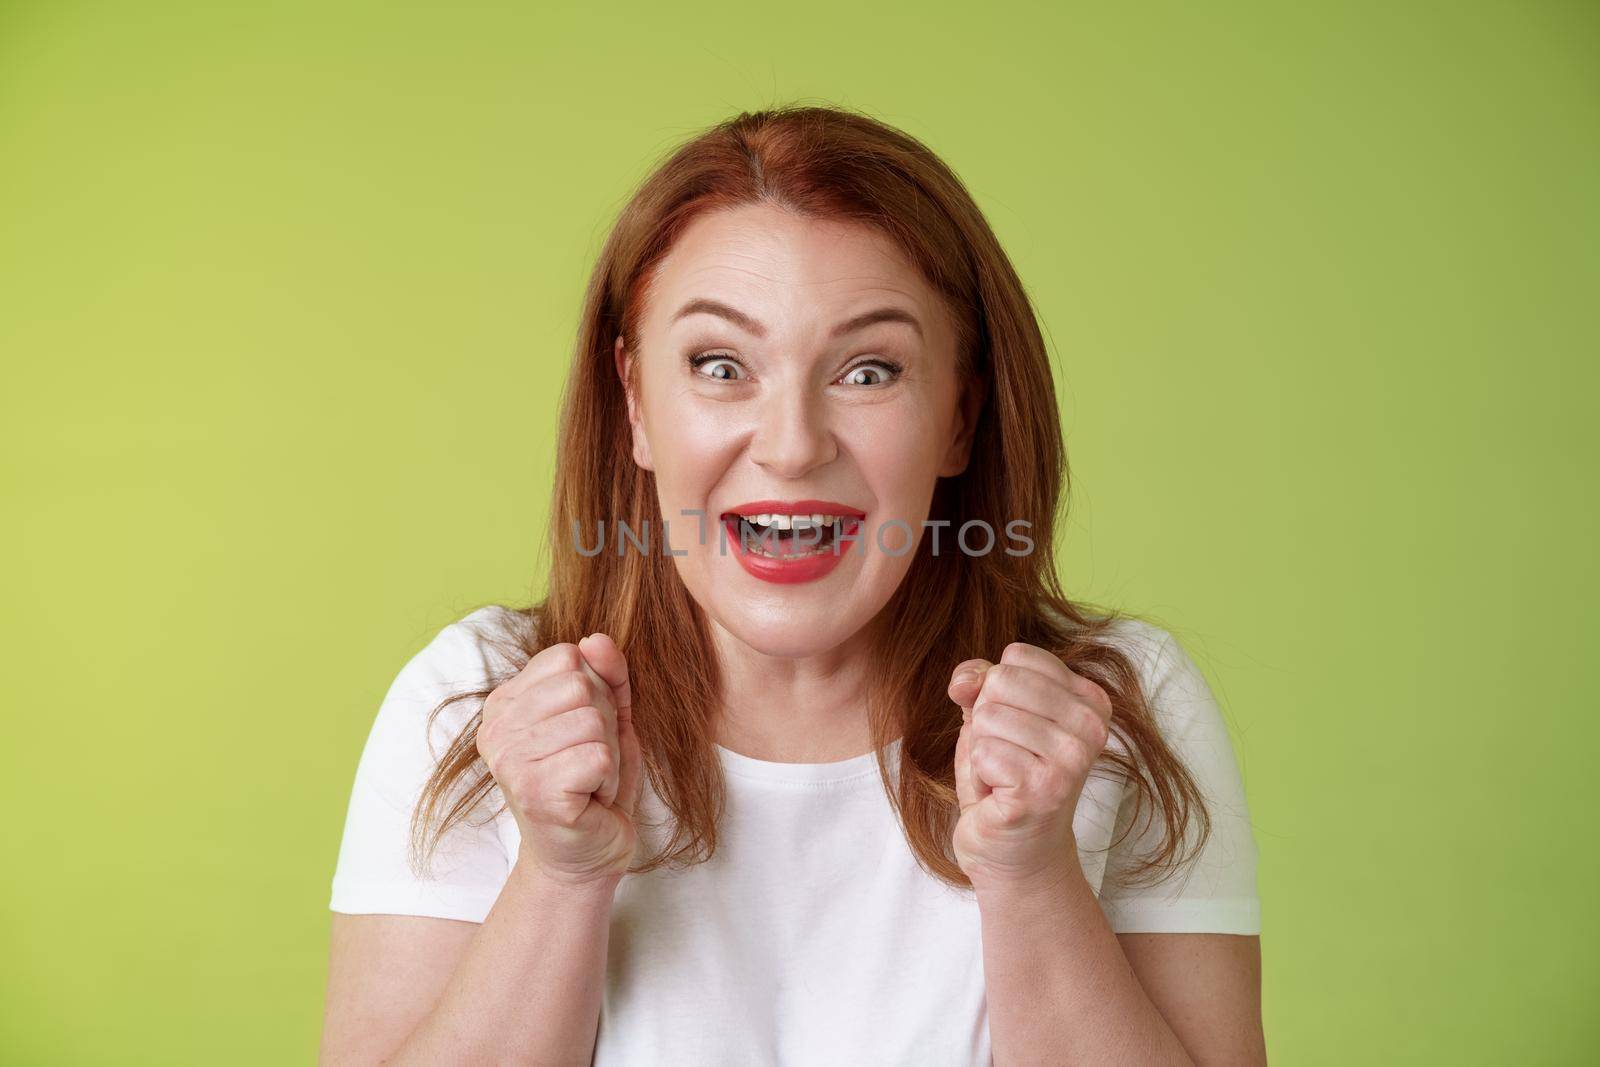 Close-up lucky enthusiastic cute redhead joyful middle-aged woman. pump fists vigorous excitement celebratory smiling broadly winning celebrating triumphing success good news standing green background.